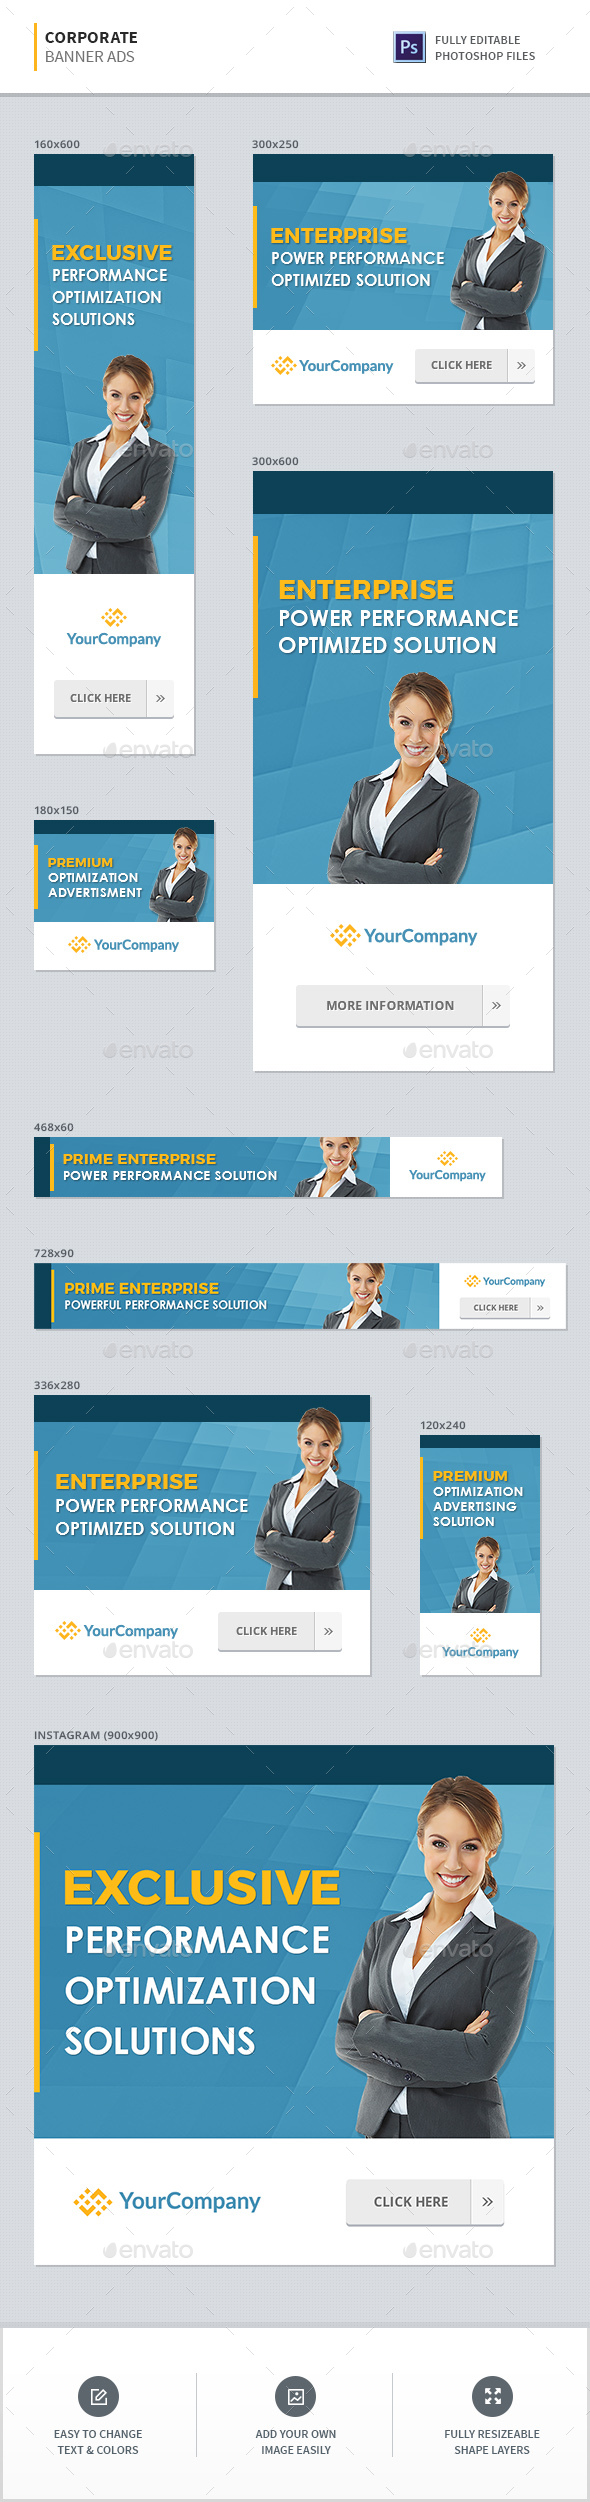 GraphicRiver Corporate Banners 20897949